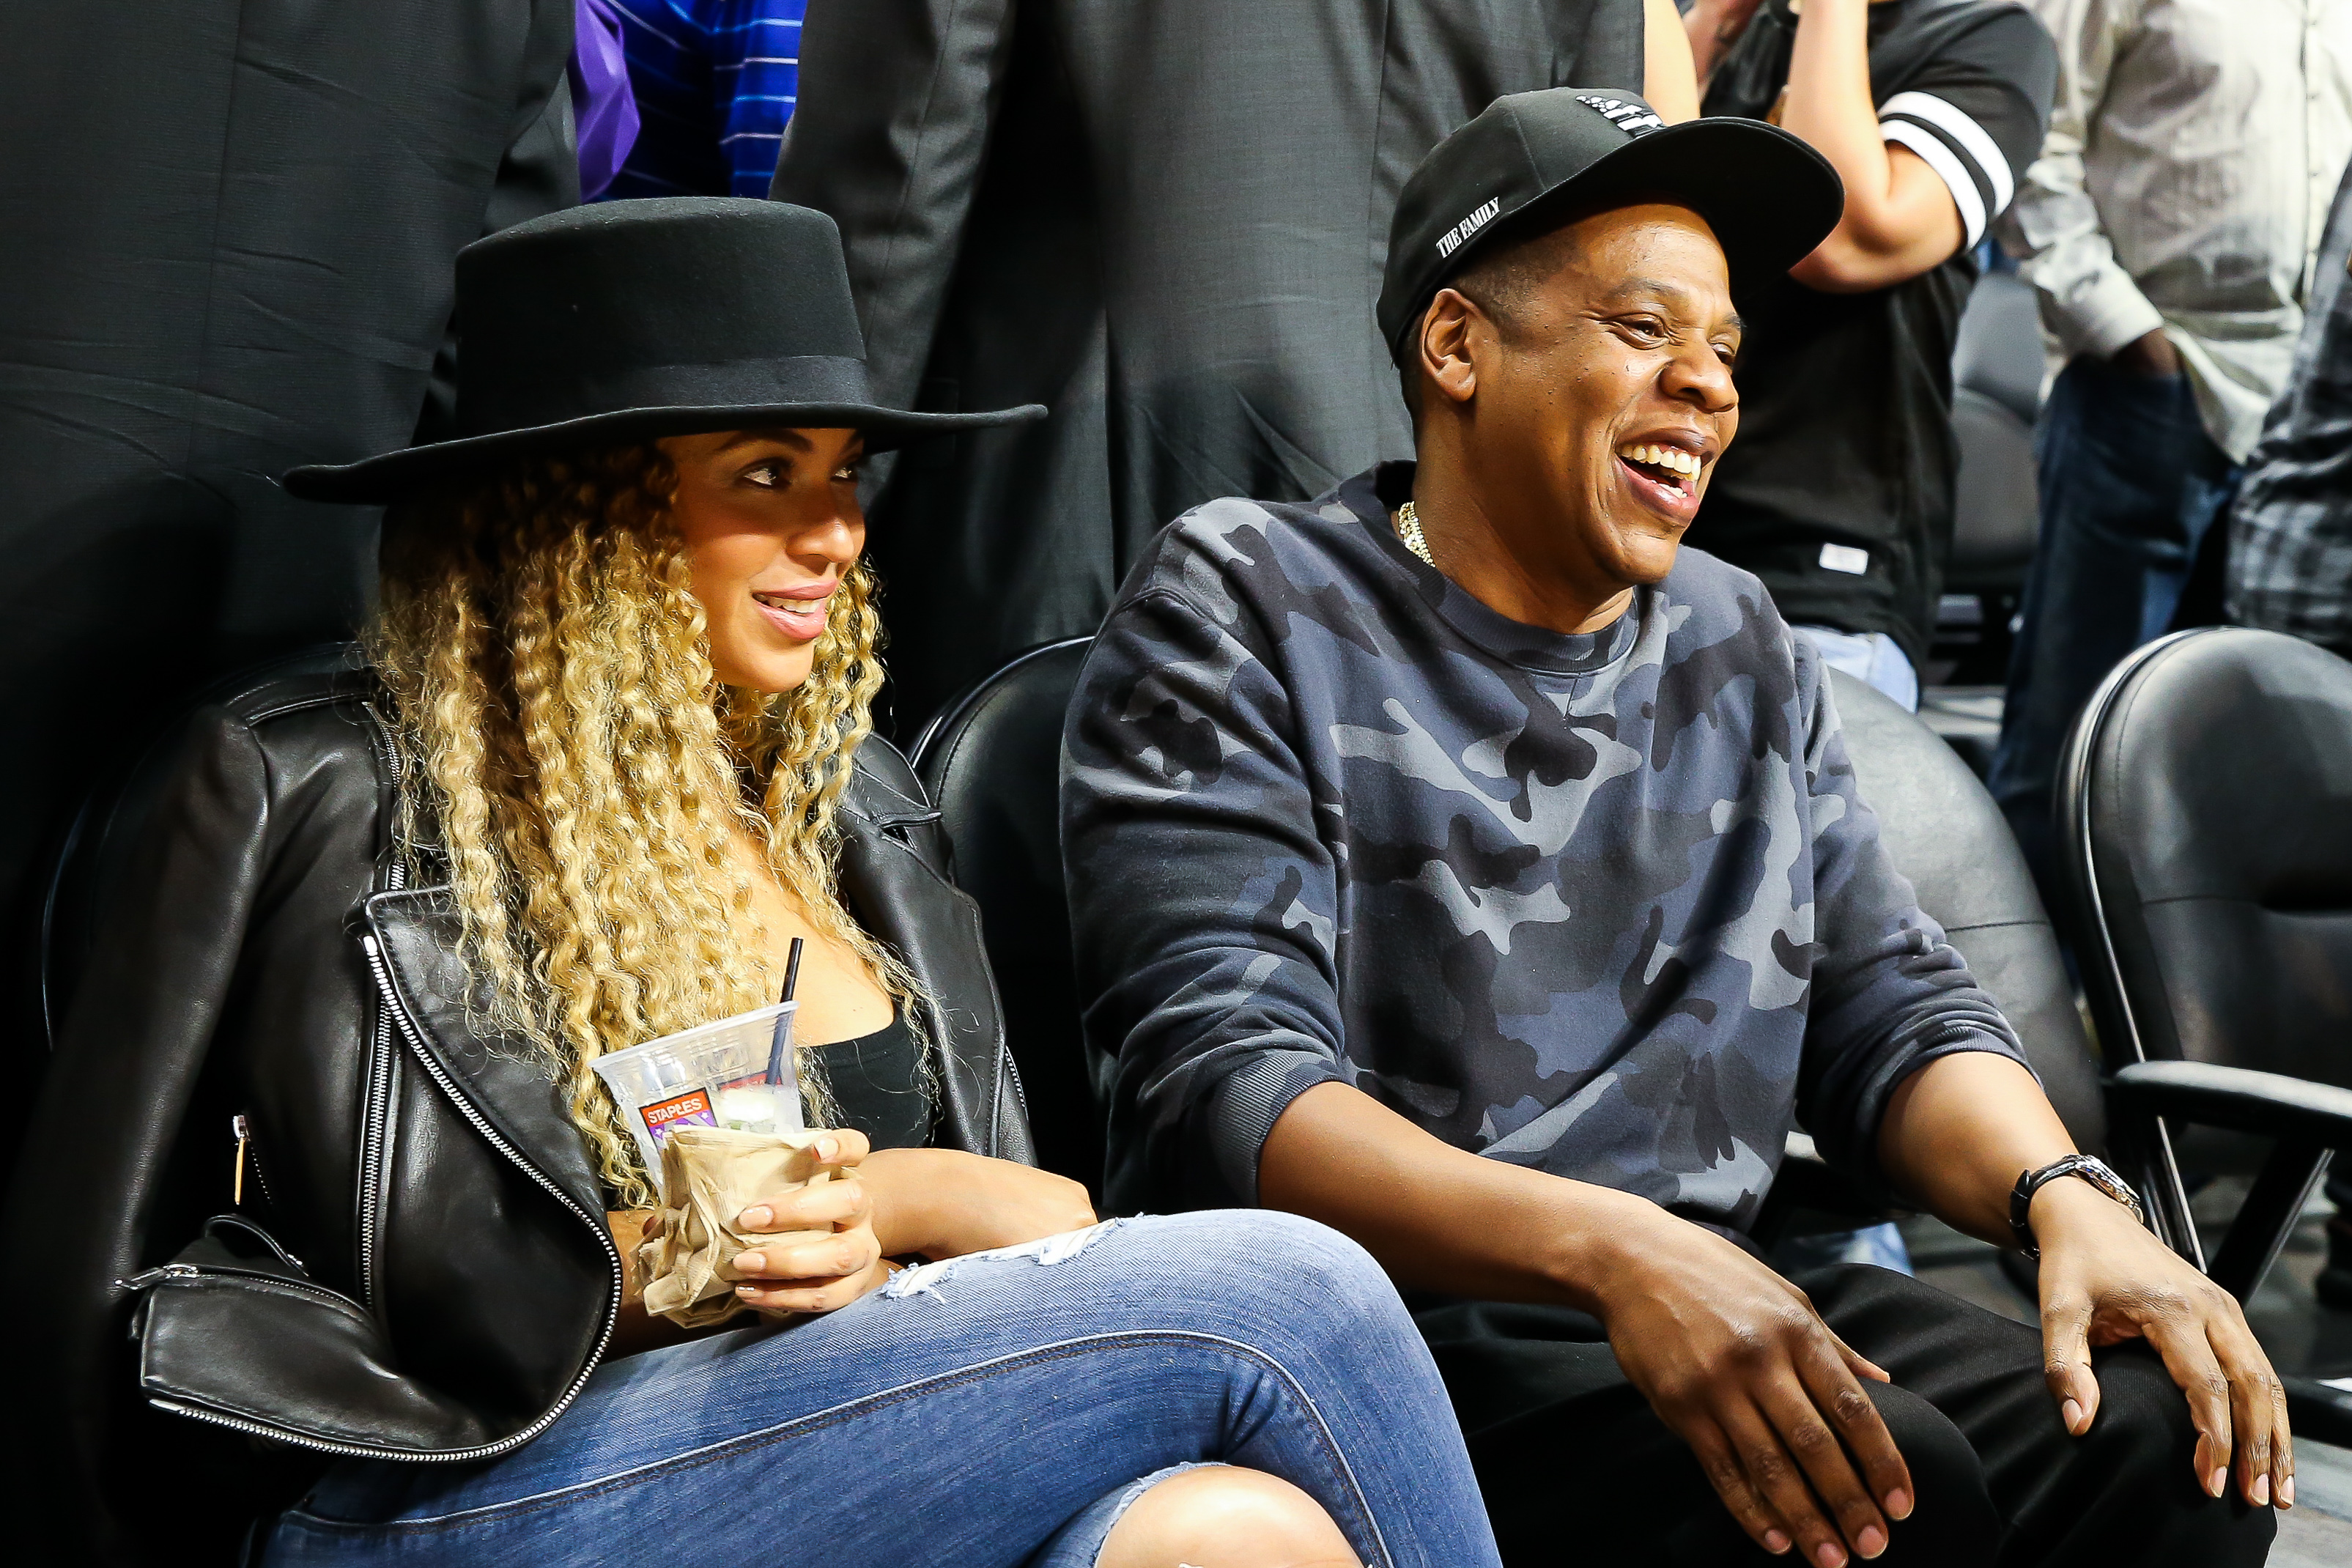 Beyonce and Jay-z